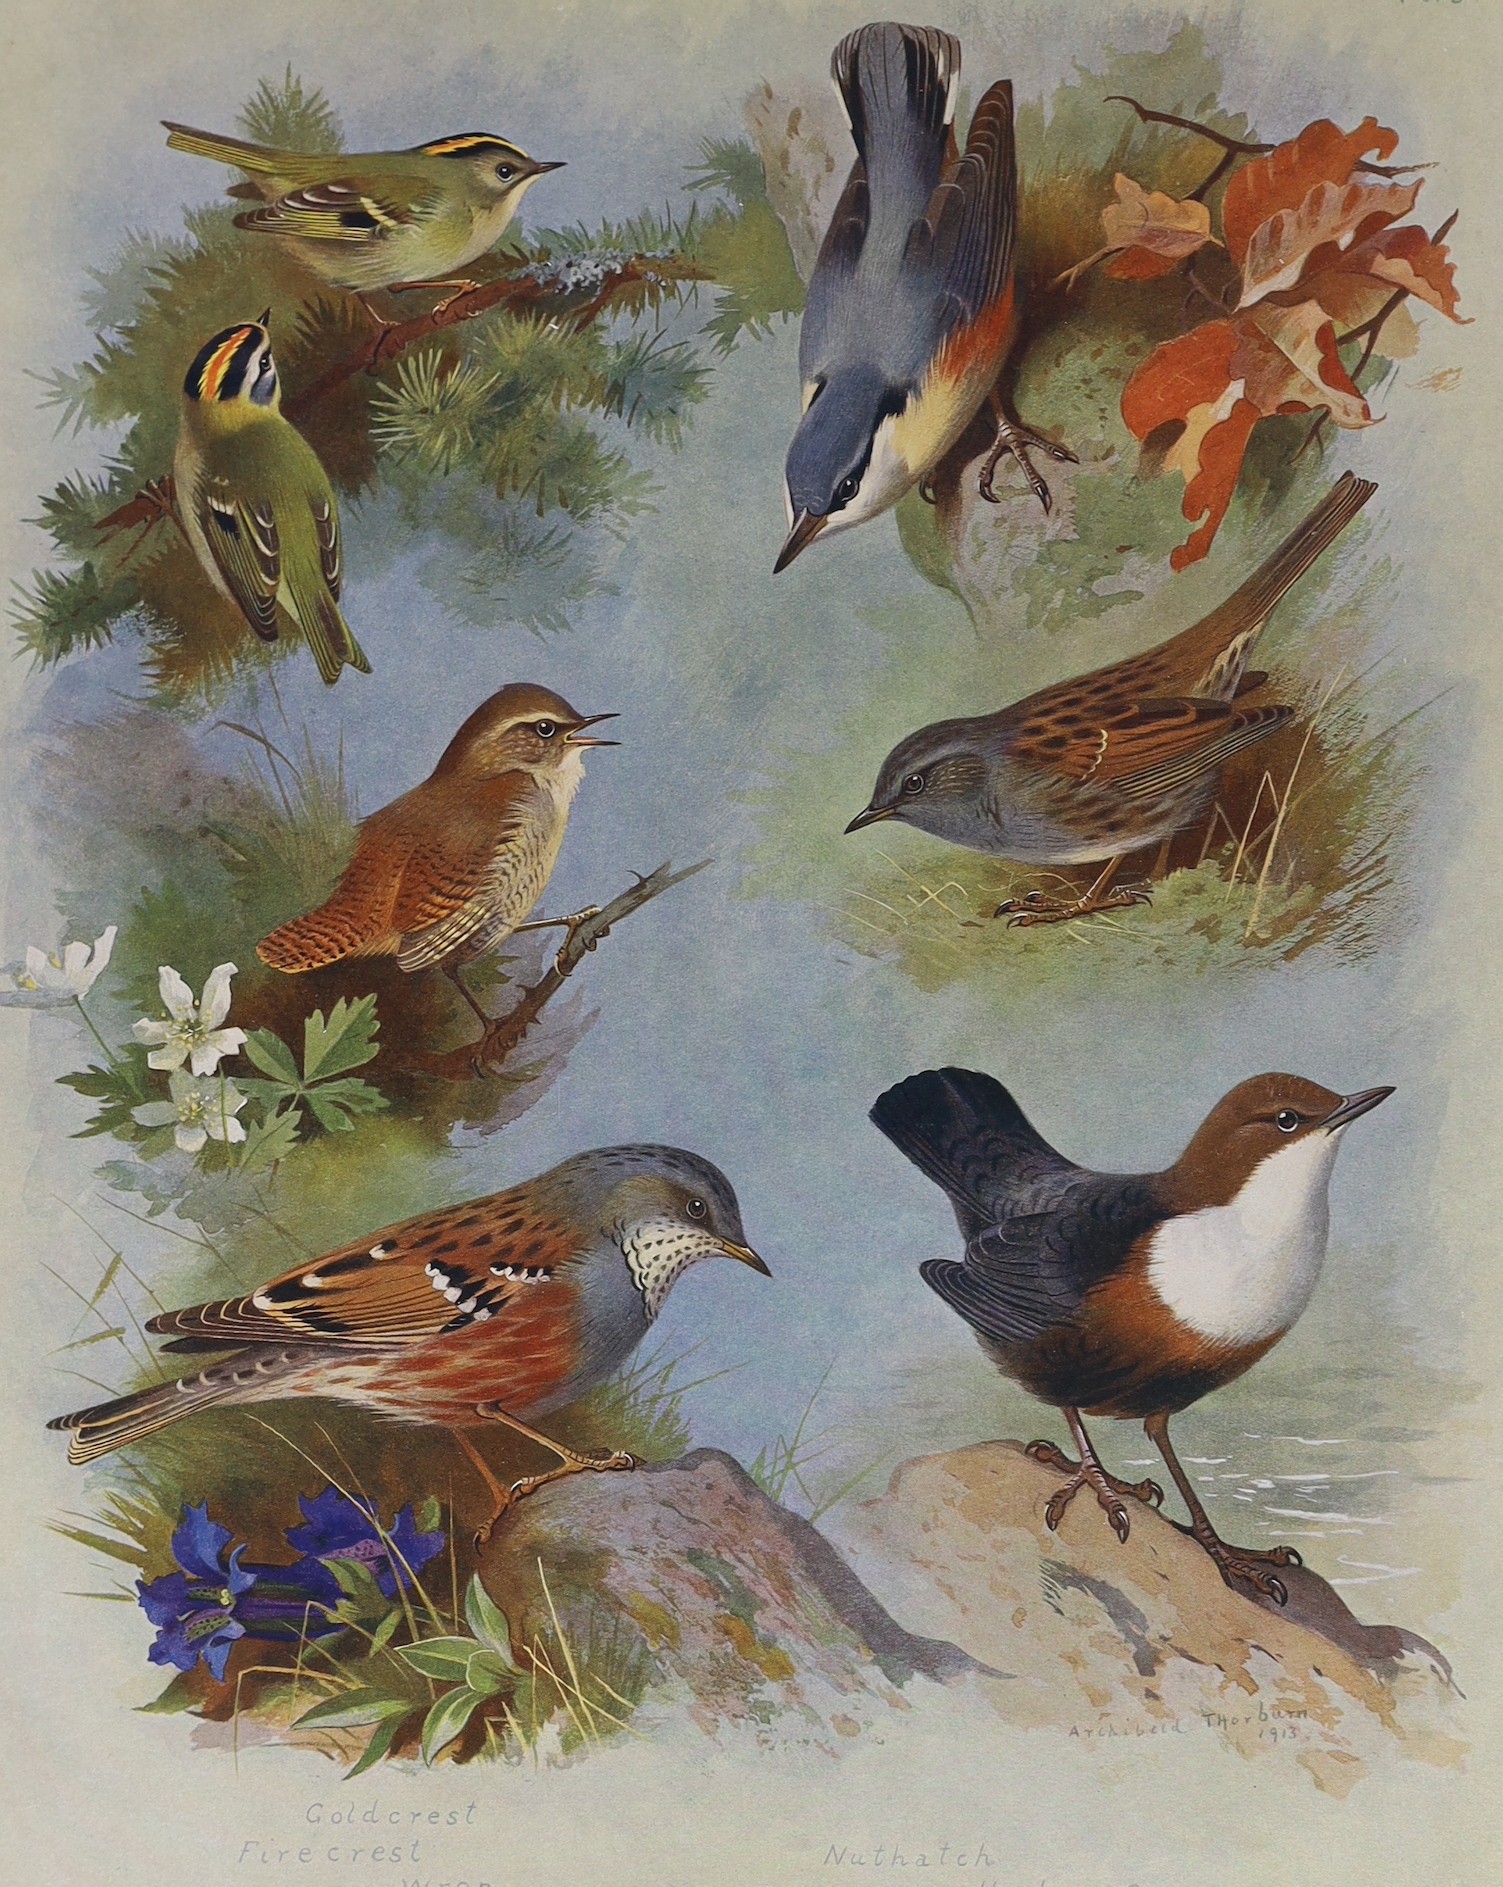 Thorburn, Archibald - British Birds, 4 vols, 4to, original red cloth, with 80 coloured plates, spines sunned, Longmans, Green and Co., London, 1917, uniformly bound with - Thorburn, Archibald - British Mammals, 2 vols, 4